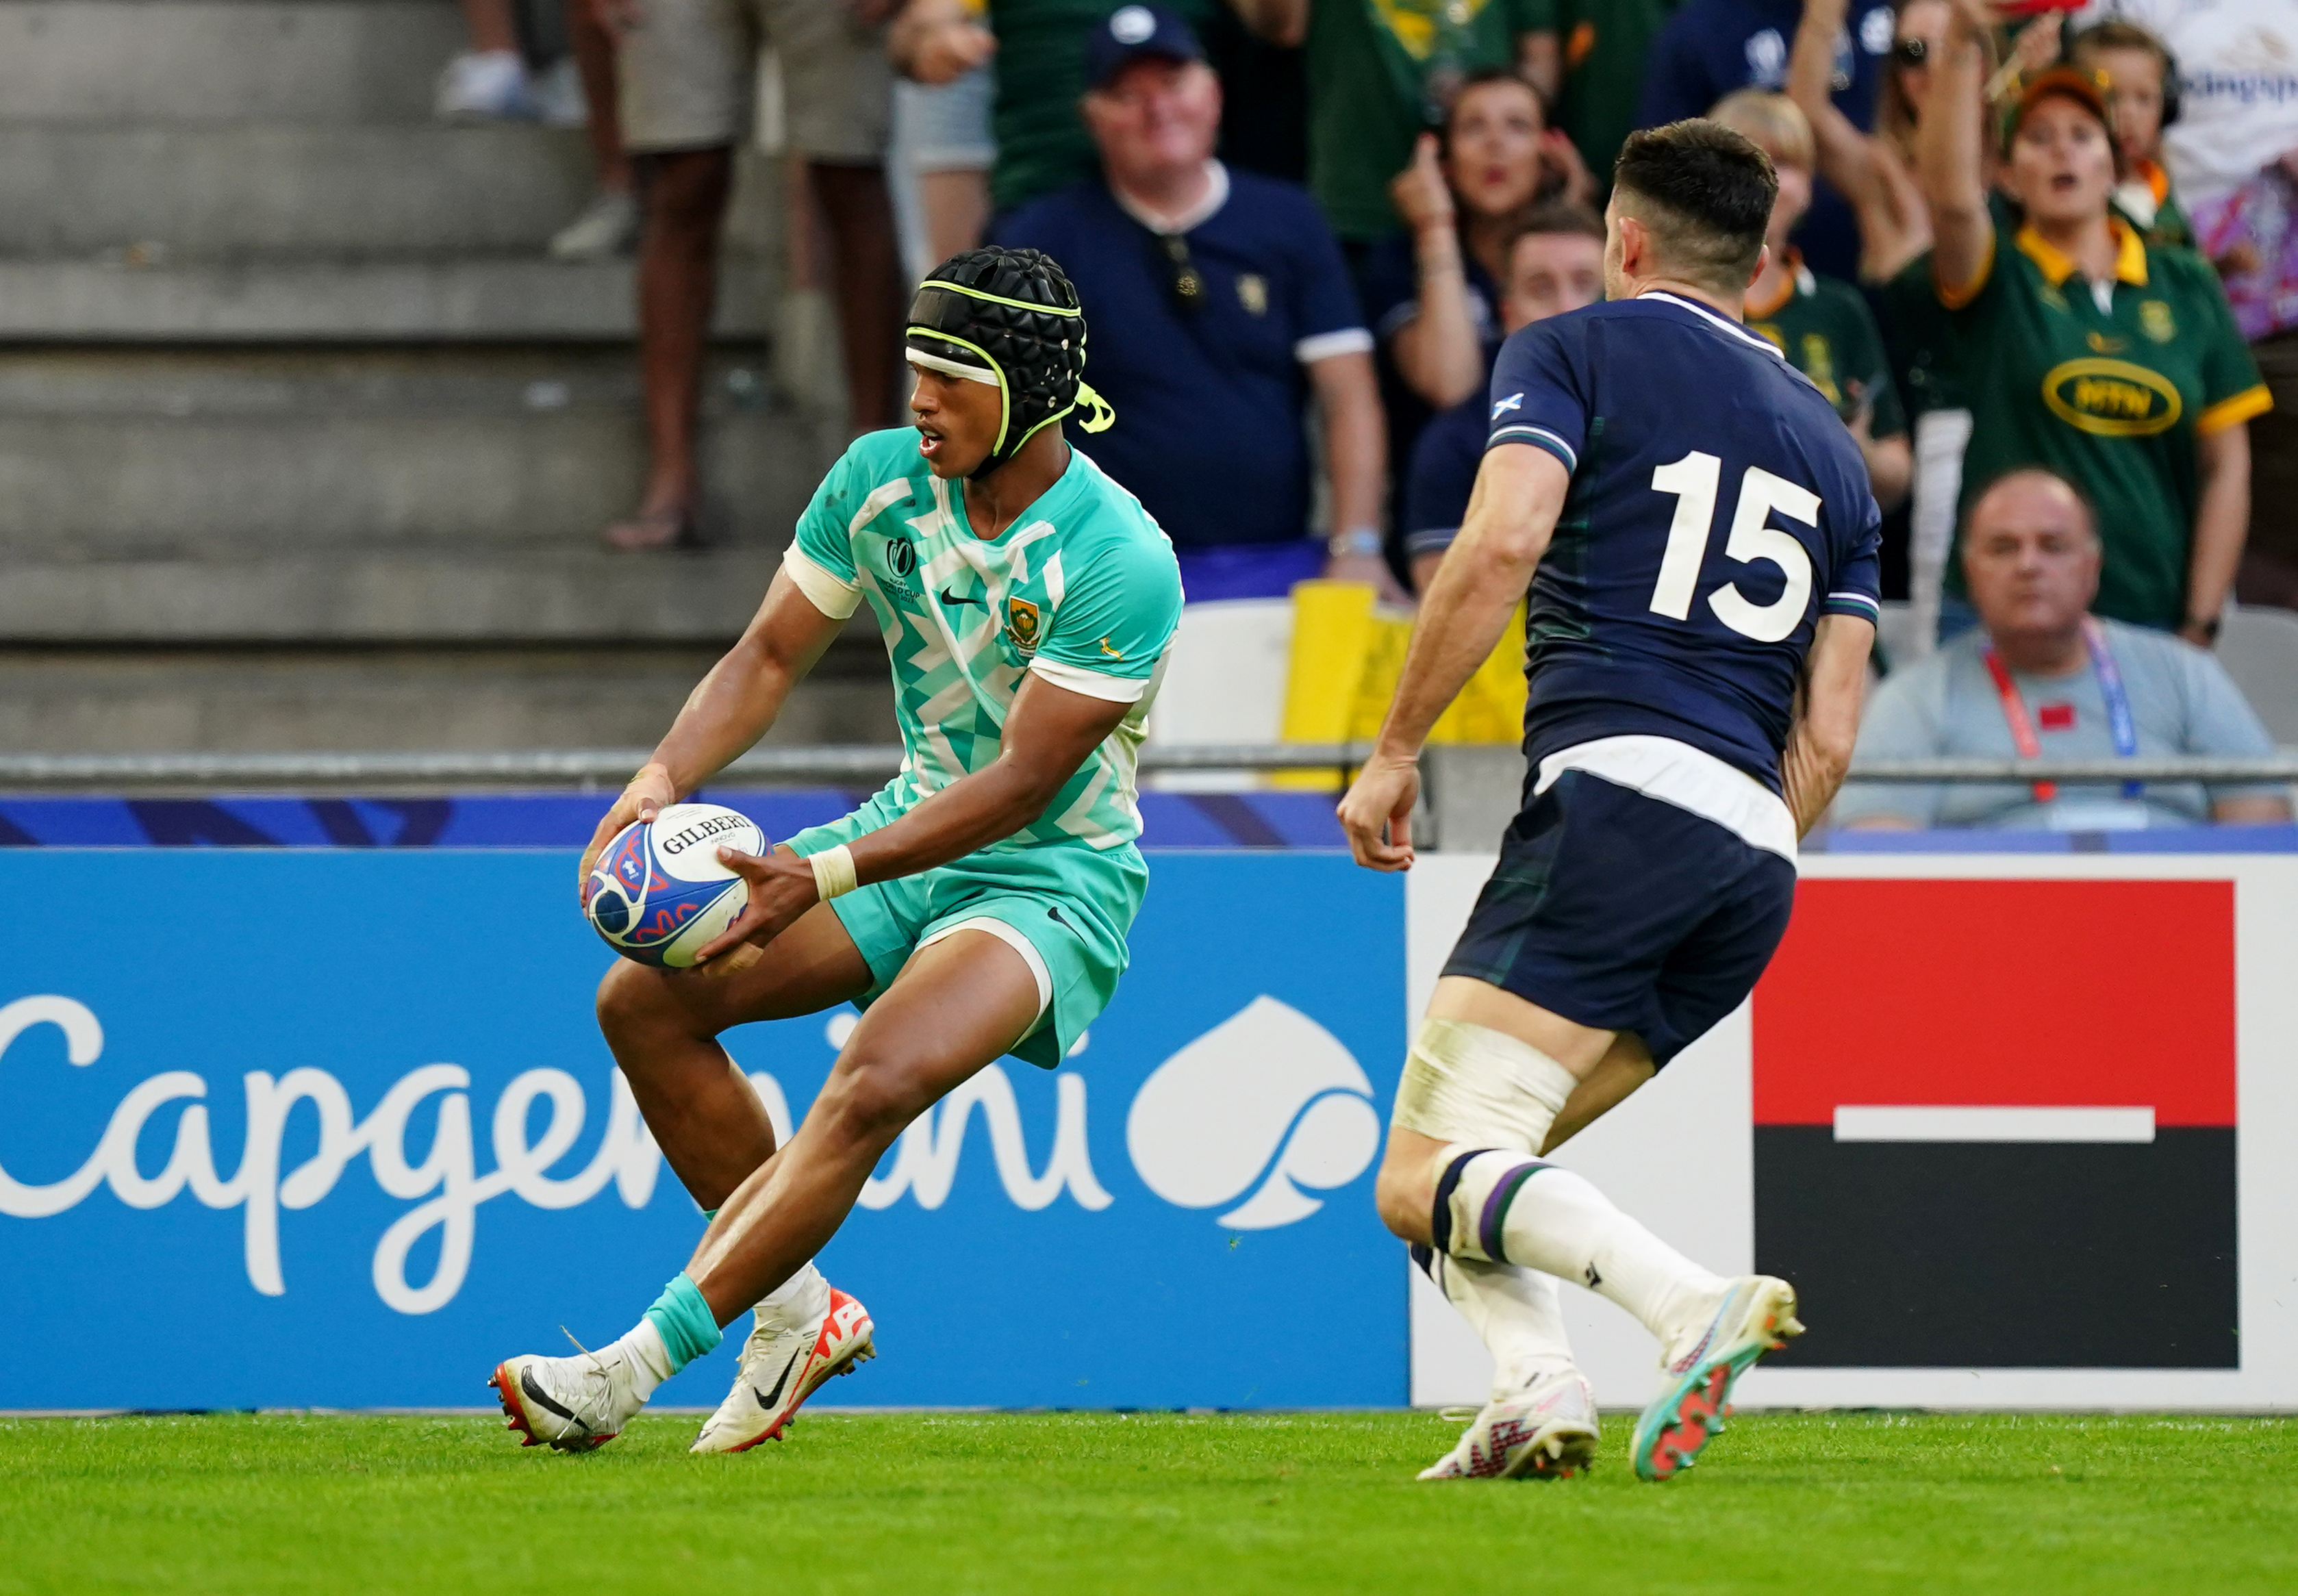 Kurt-Lee Arendse scored a blistering try to wrap up victory for South Africa